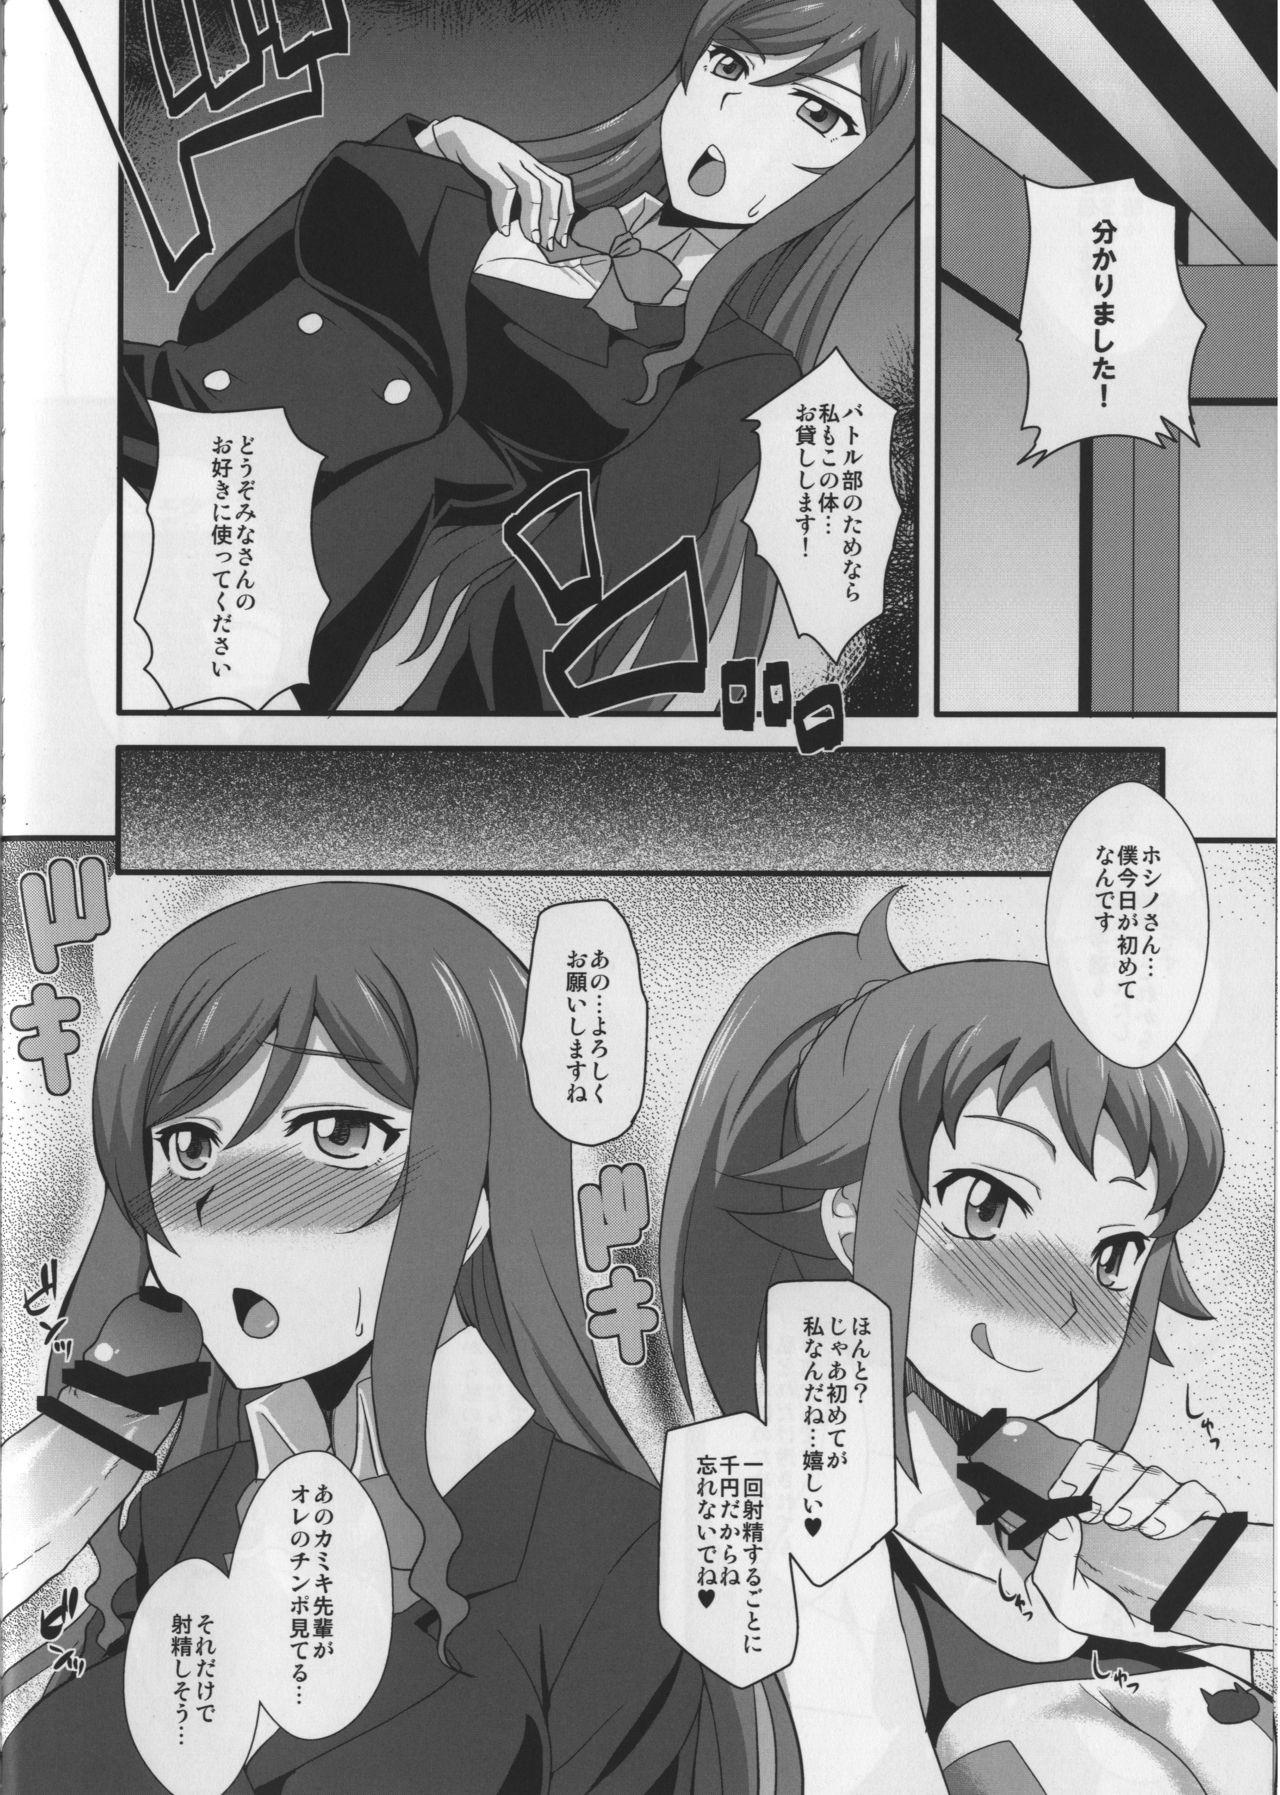 Family Sex Fighters TRY - Gundam build fighters try Inked - Page 6